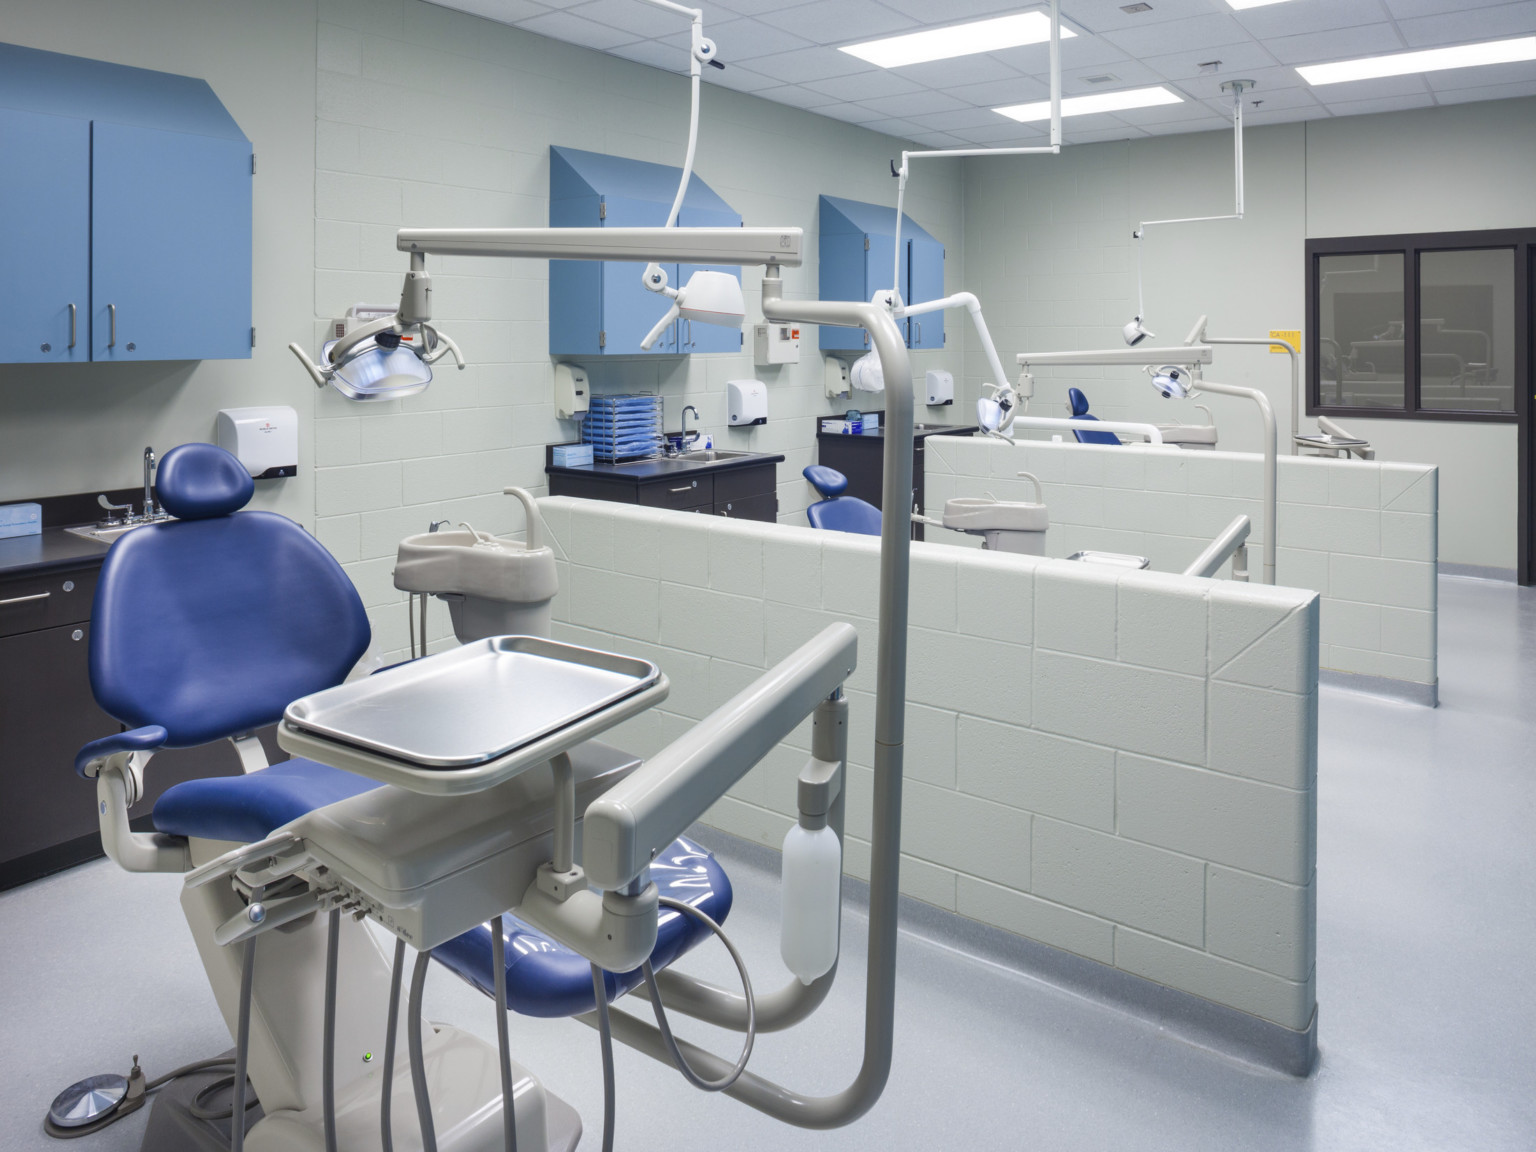 3 dental exam chairs separated by concrete block half walls. Back wall has blue cabinets behind each chair